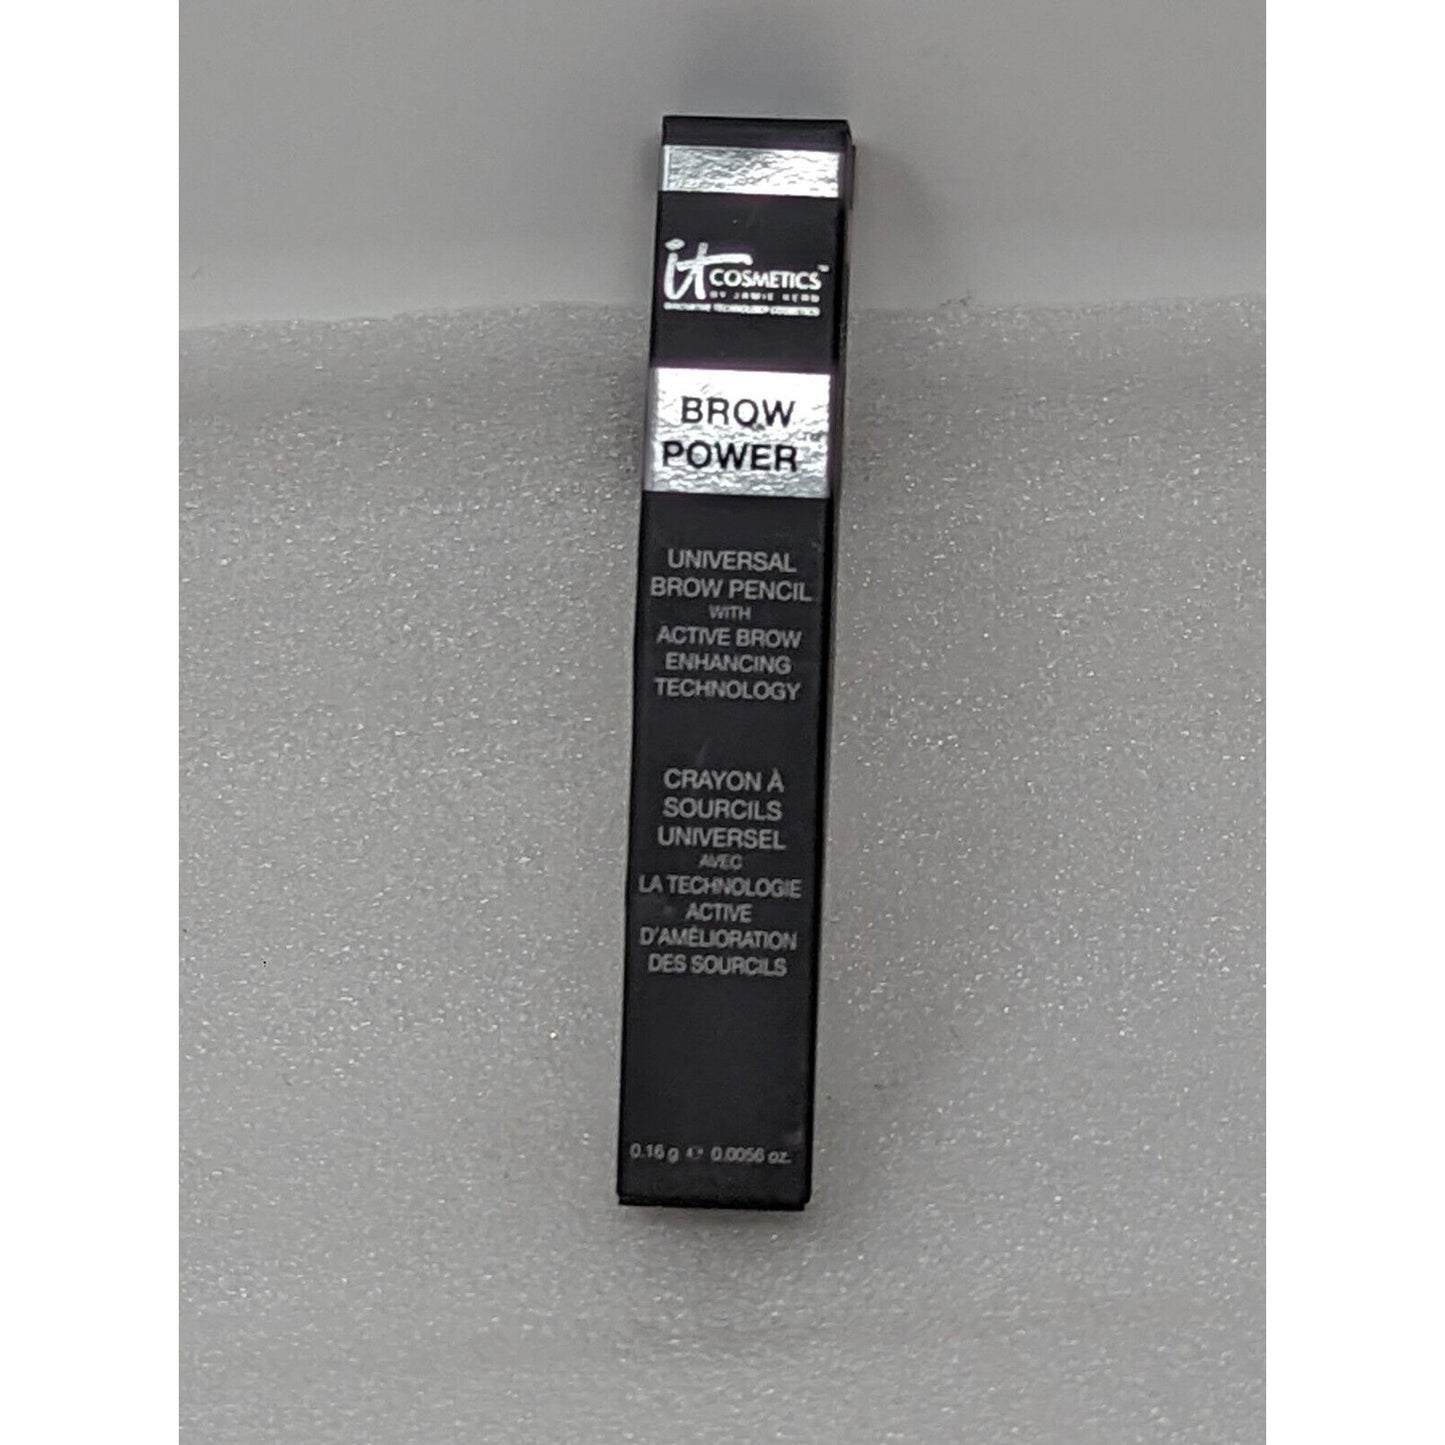 IT Cosmetics Brow Power Universal Brow Pencil w/Active Enhancing Technology